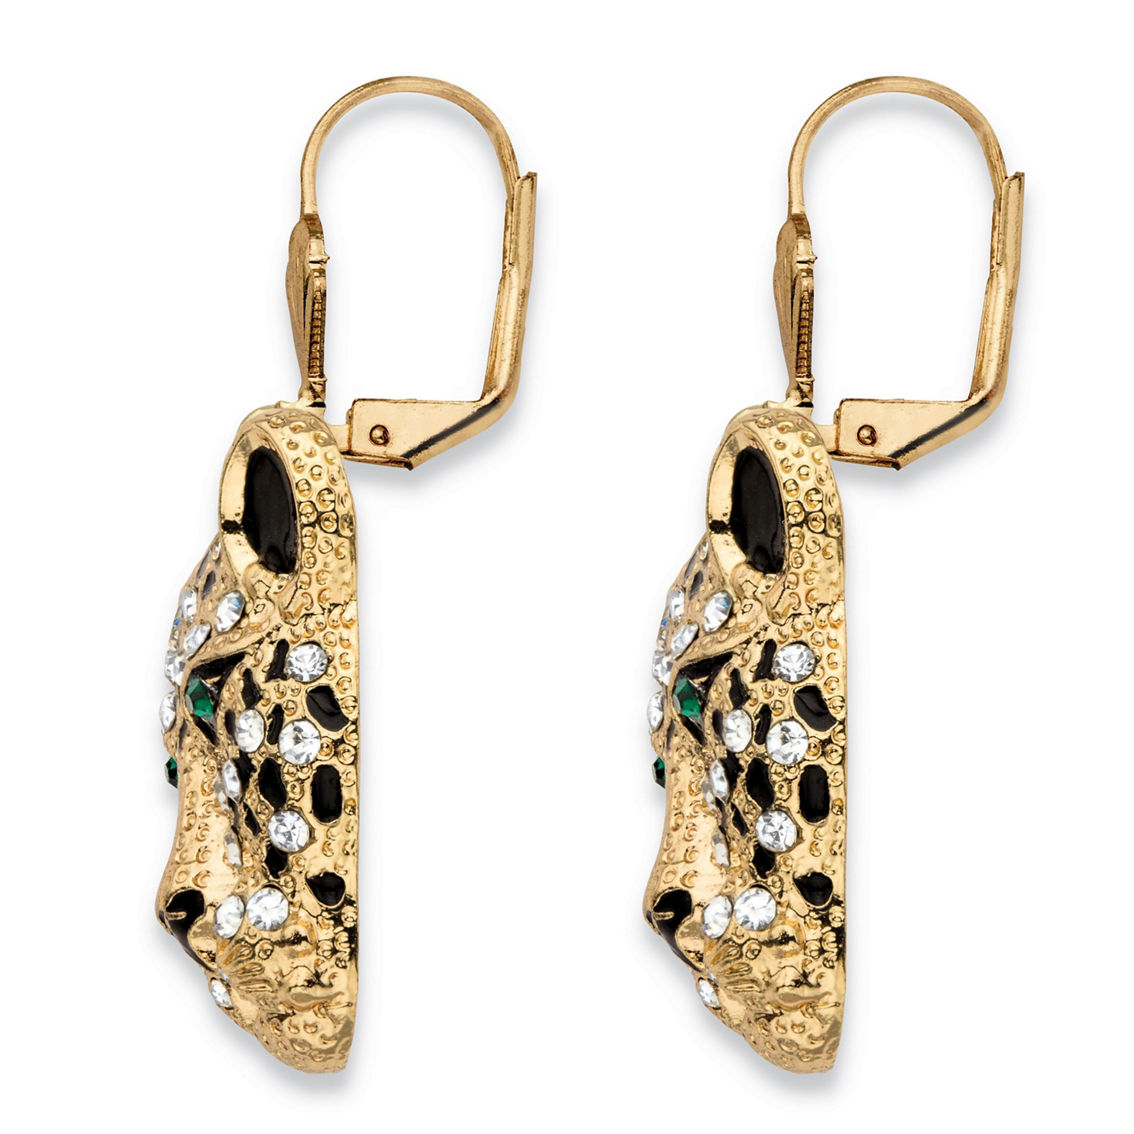 White Crystal Leopard Face Drop Earrings with Green Crystal Accents in Goldtone - Image 2 of 4